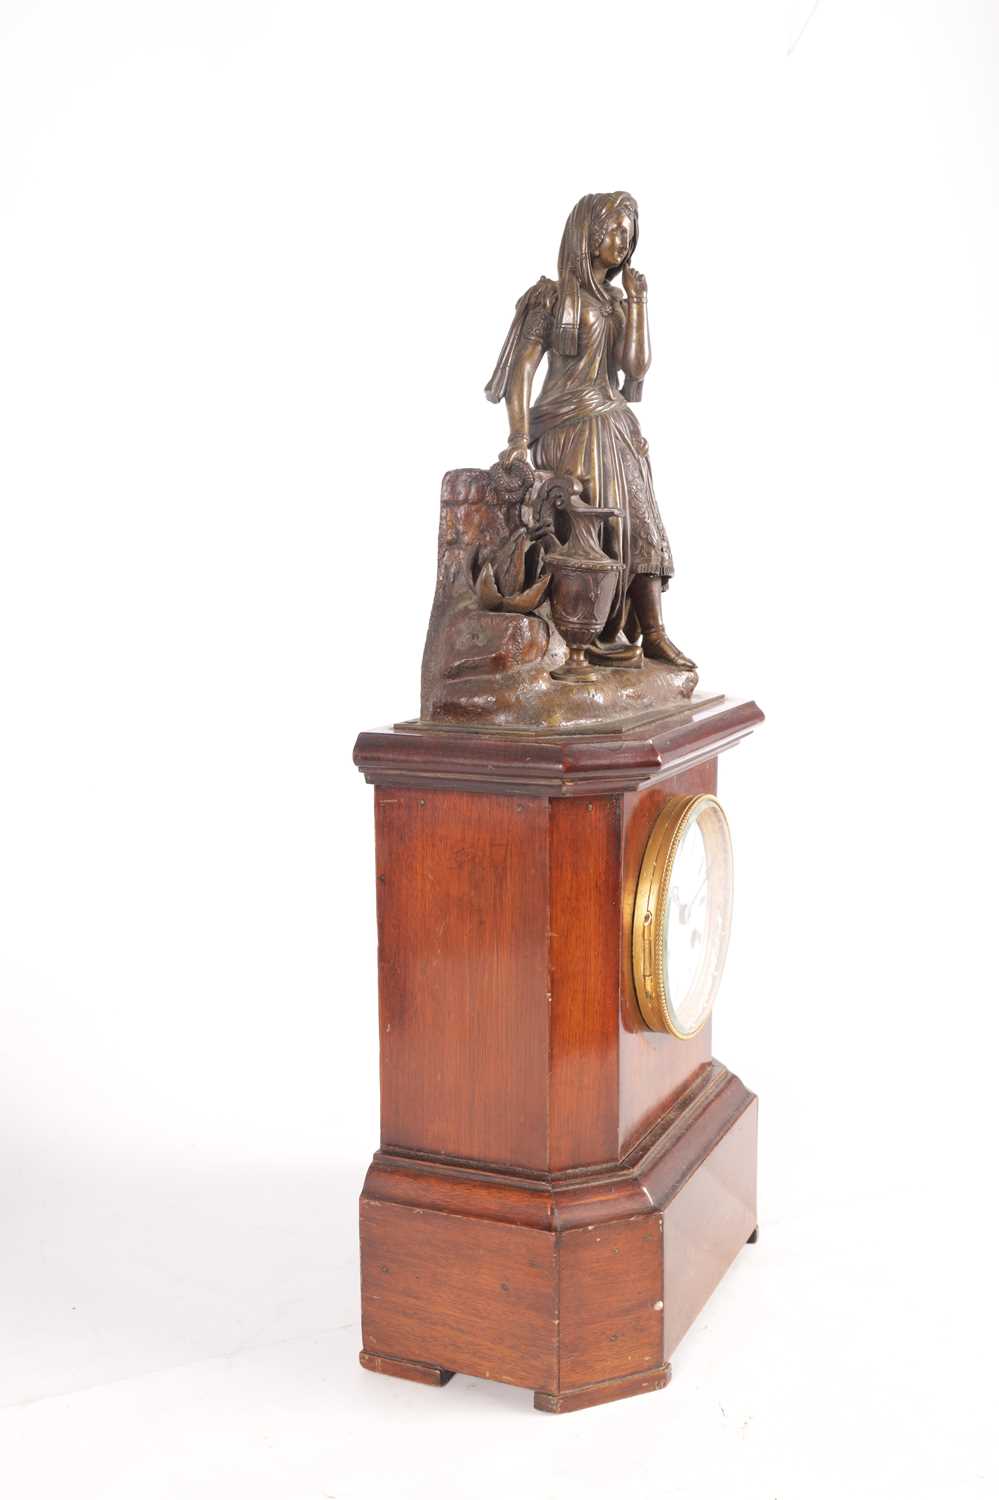 A MID 19TH CENTURY FRENCH BRONZE FIGURAL MANTEL CLOCK - Image 7 of 11